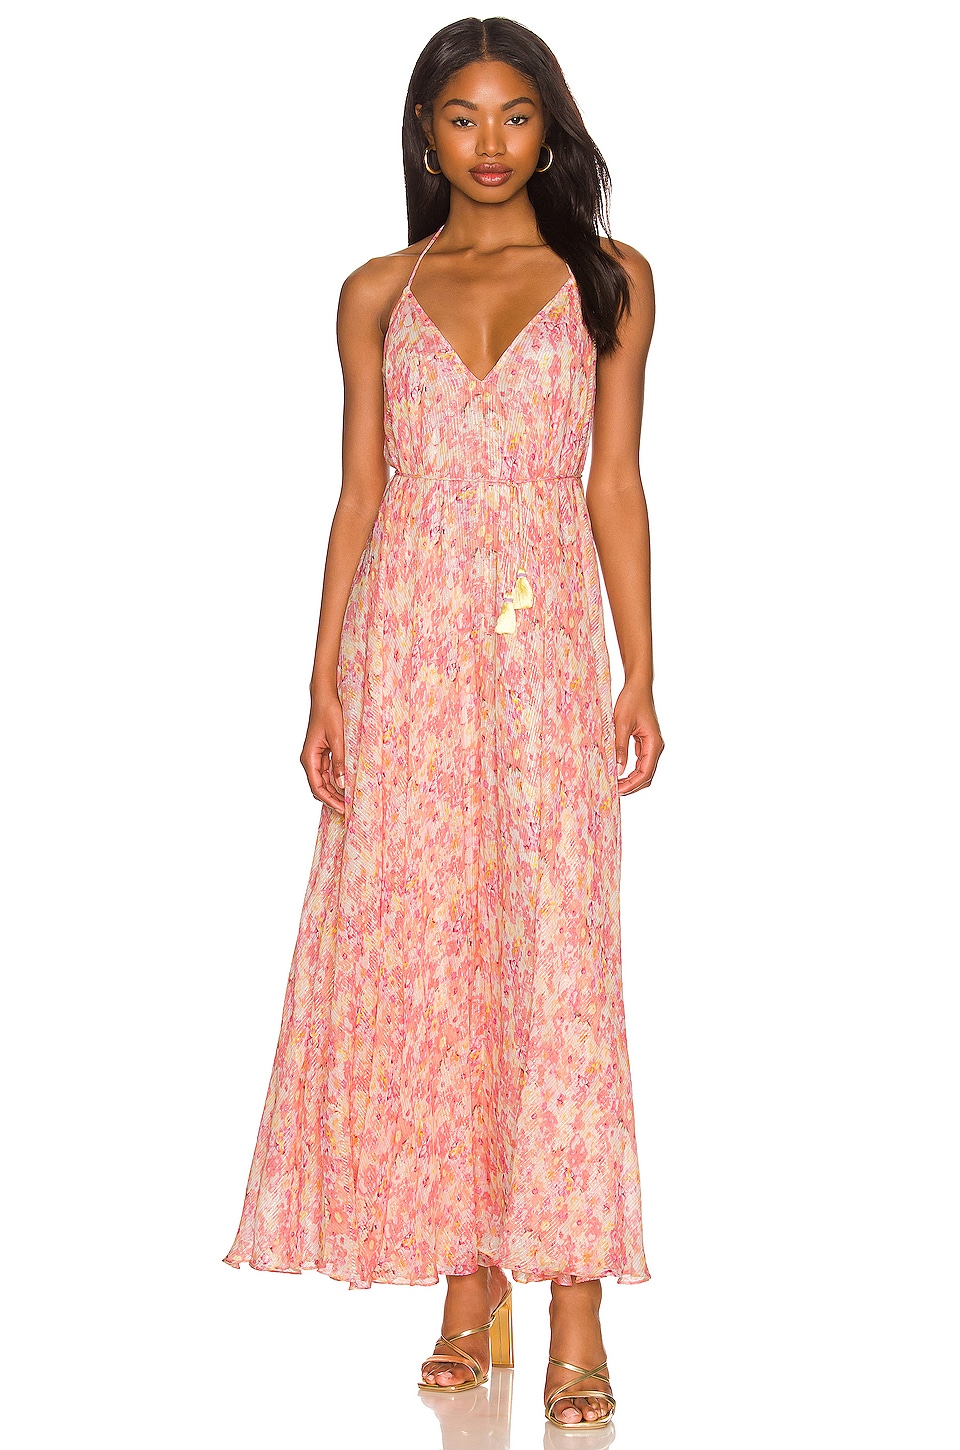 ROCOCO SAND Long Dress in Peach & Butter Yellow